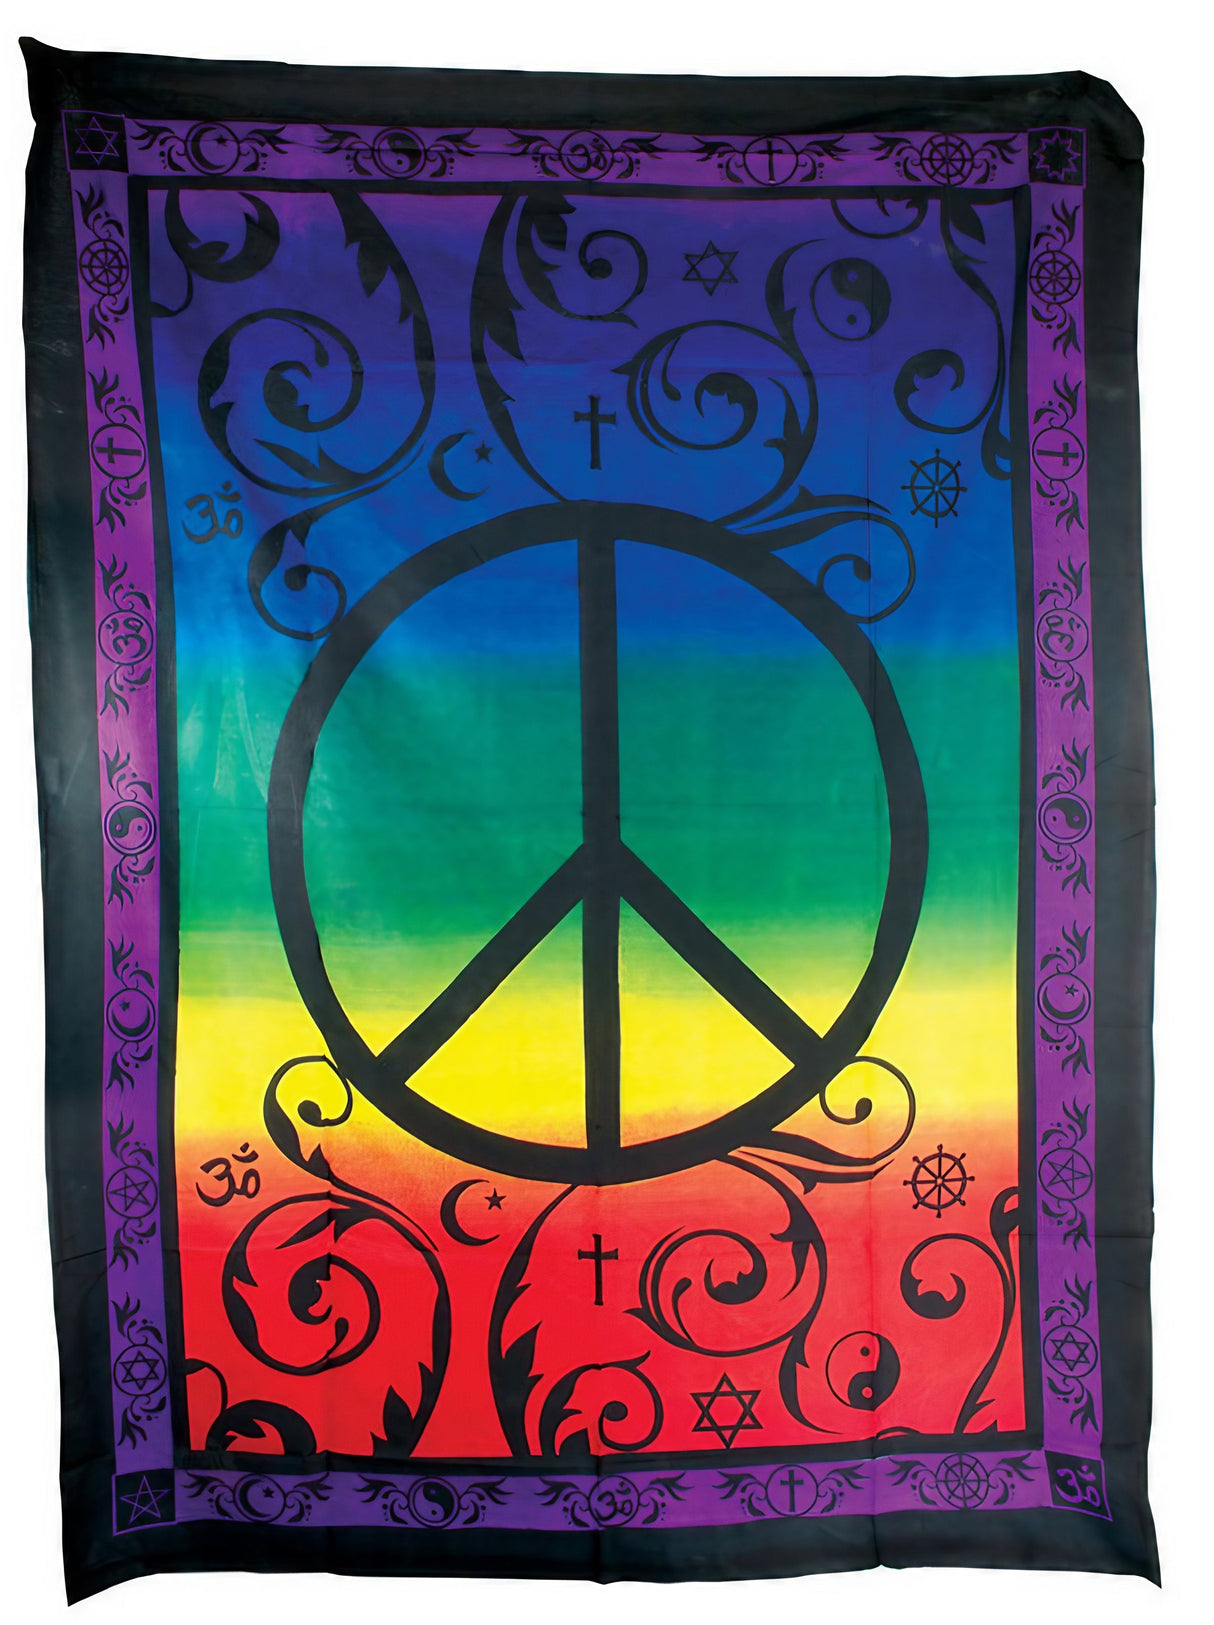 ThreadHeads Peace Tapestry with vibrant tie-dye design and peace symbol - 55"x85" front view